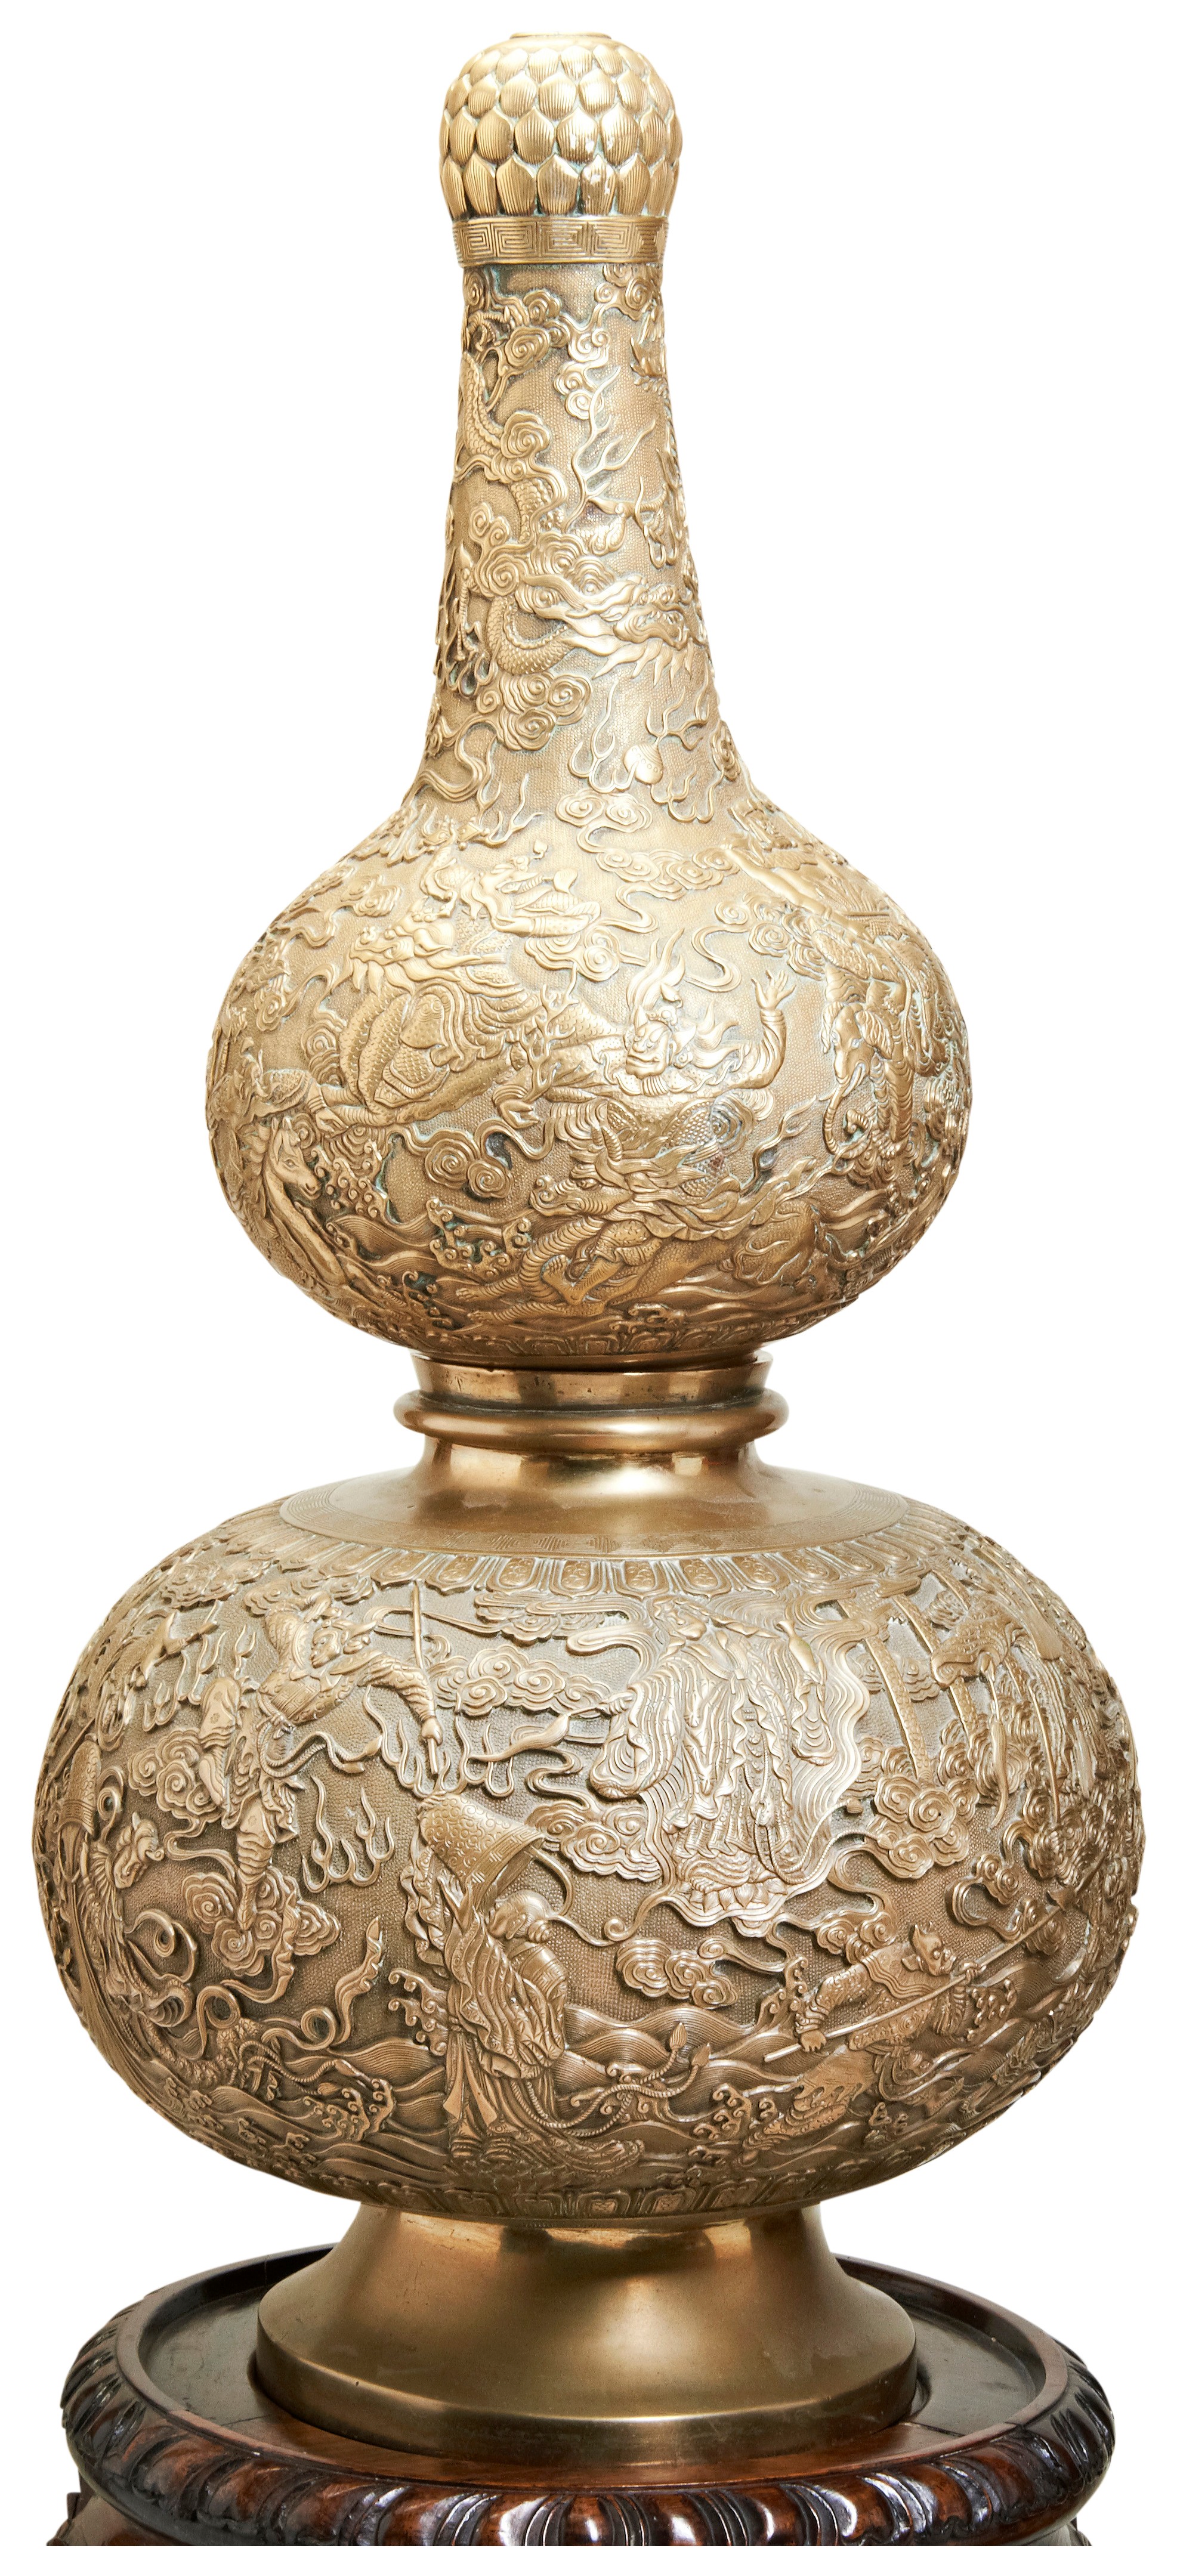 A FINE AND LARGE GILT-BRONZE DOUBLE-GOURD INCENSE BURNER  QING DYNASTY, 18TH / 19TH CENTURY 清 - Image 3 of 5